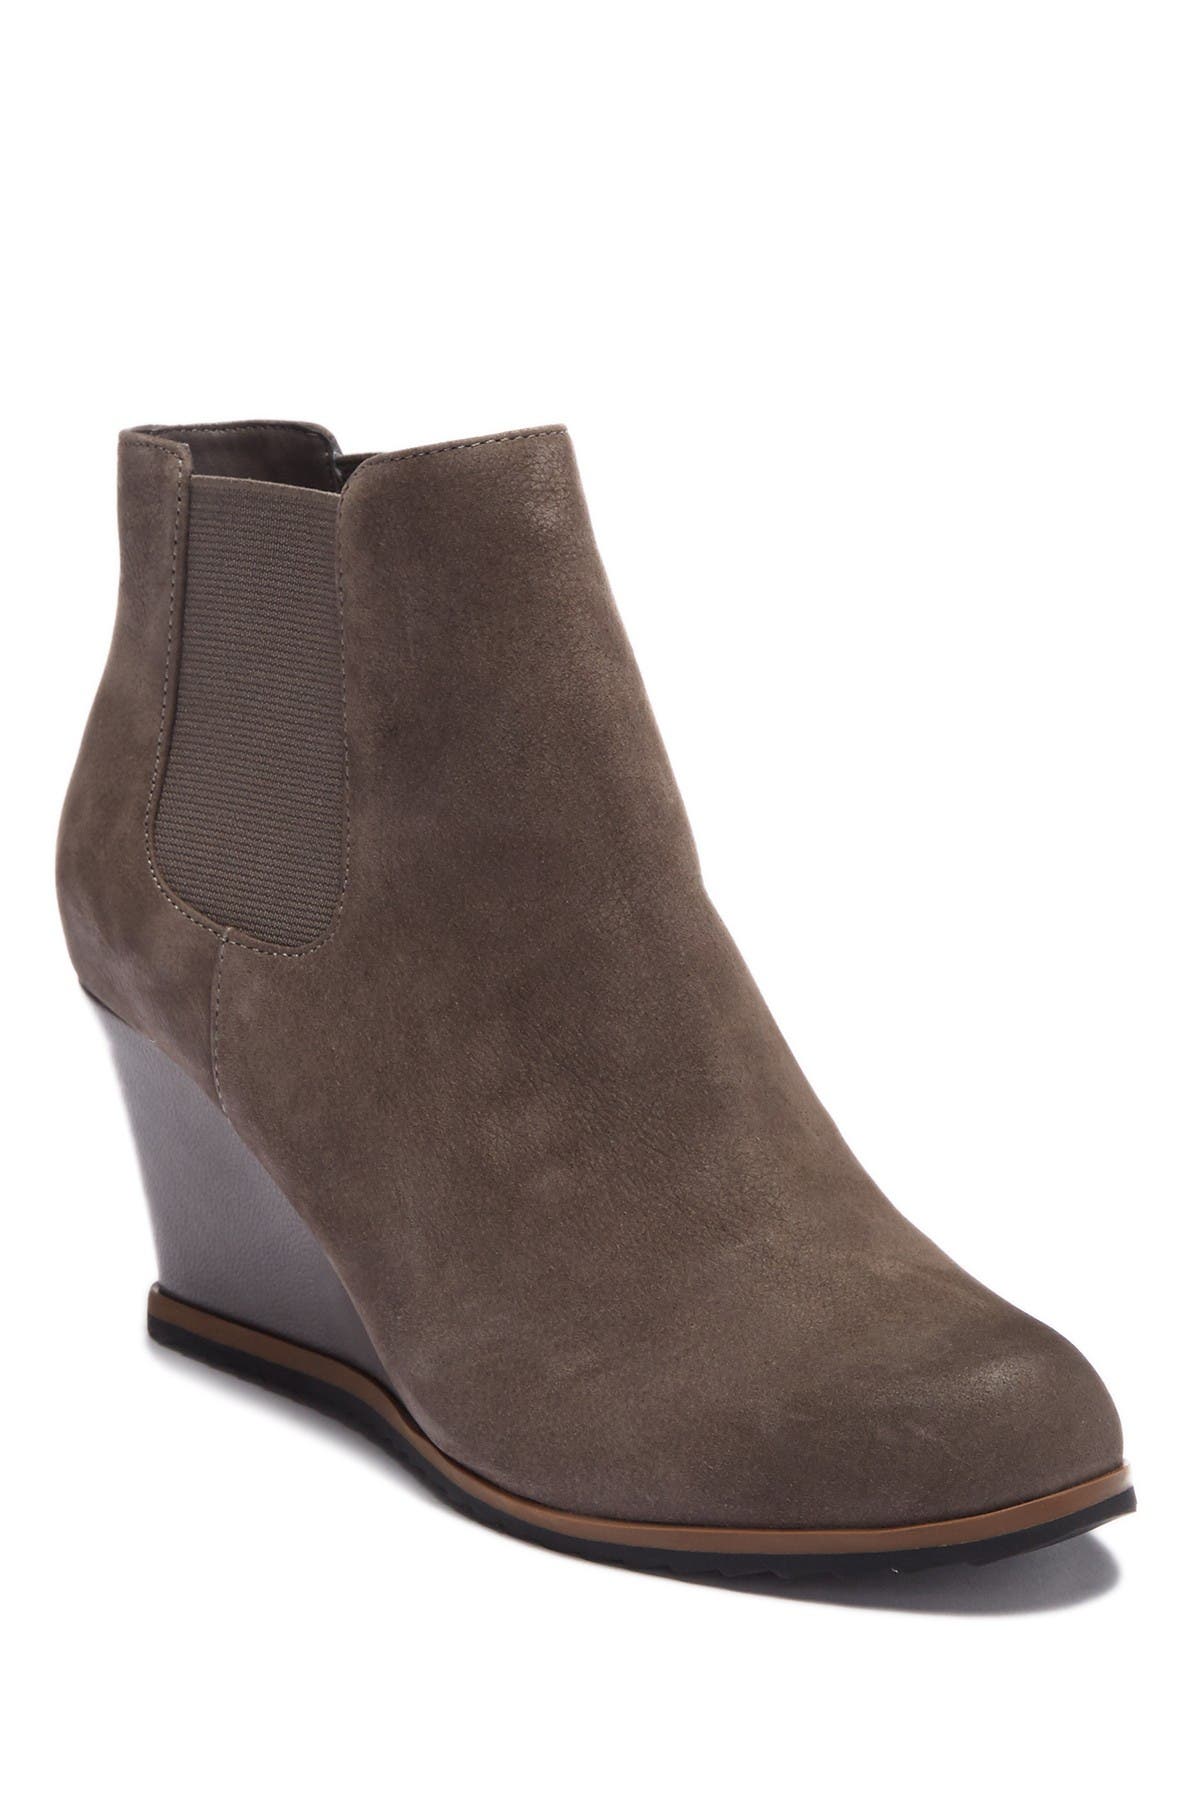 SUSINA | Altair Leather Wedge Bootie 